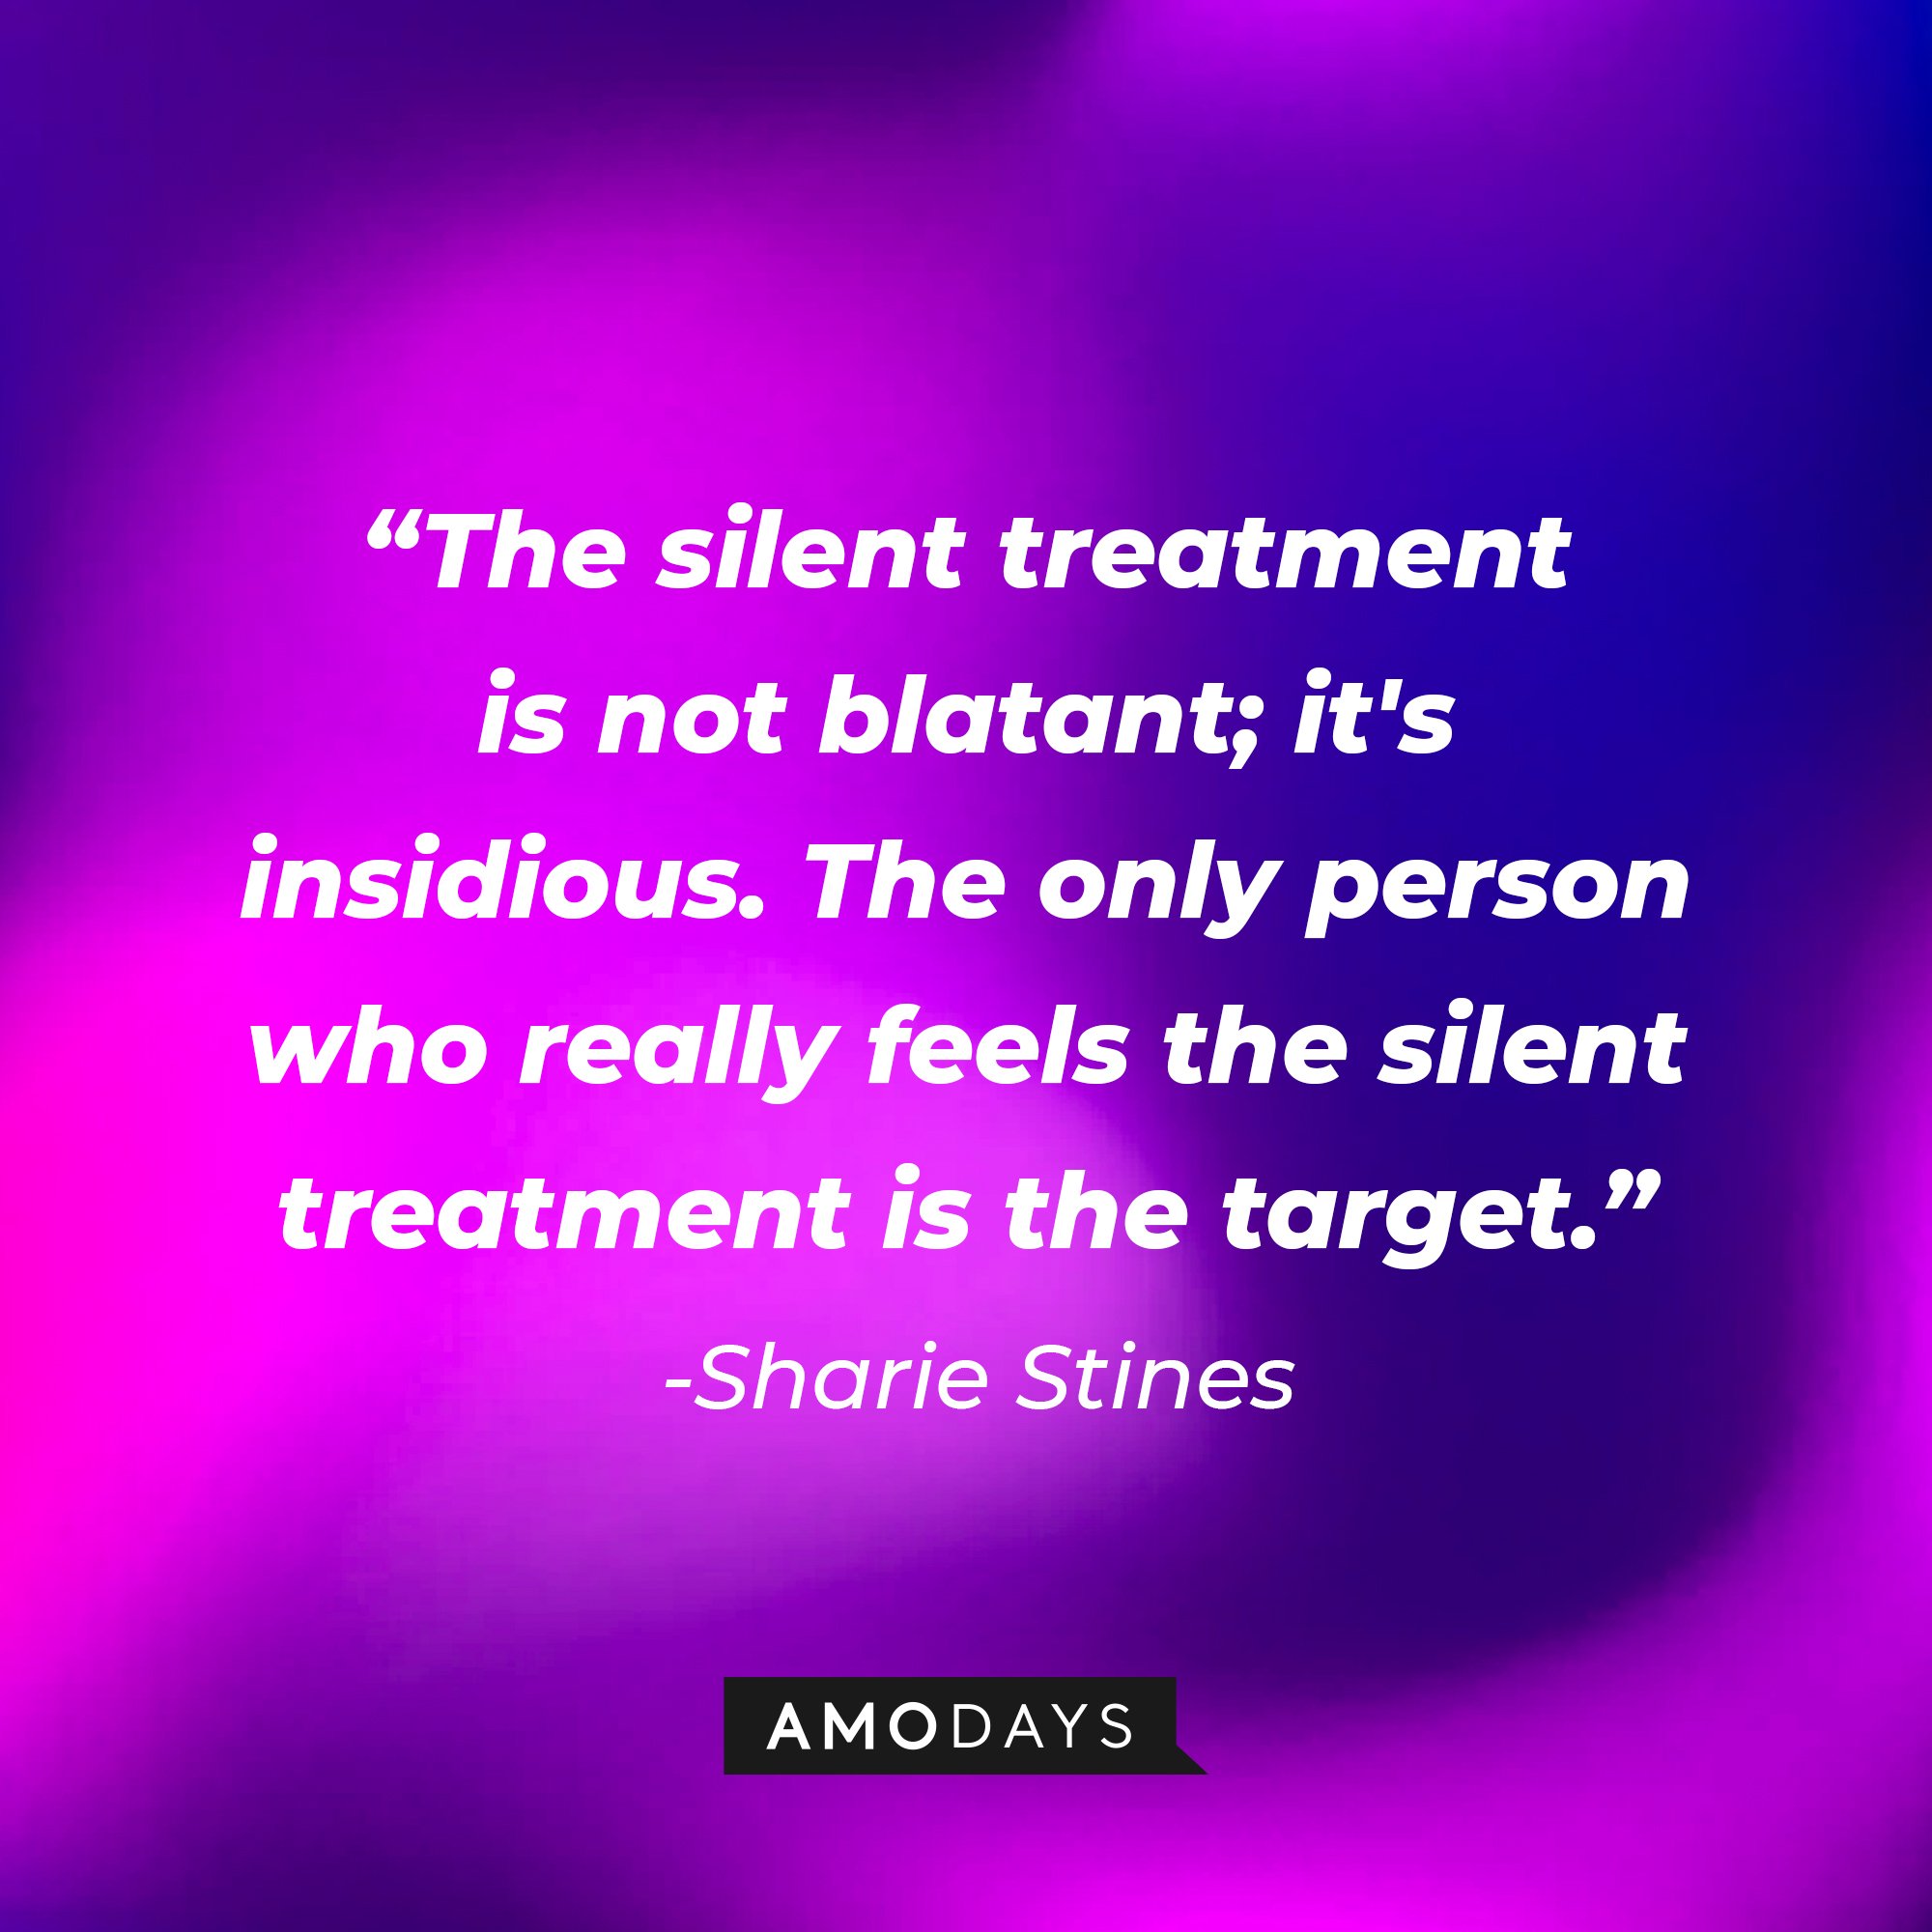 Sharie Stines' quote:\\\\u00a0"The silent treatment is not blatant; it's insidious. The only person who really feels the silent treatment is the target."\\\\u00a0| Image: AmoDays